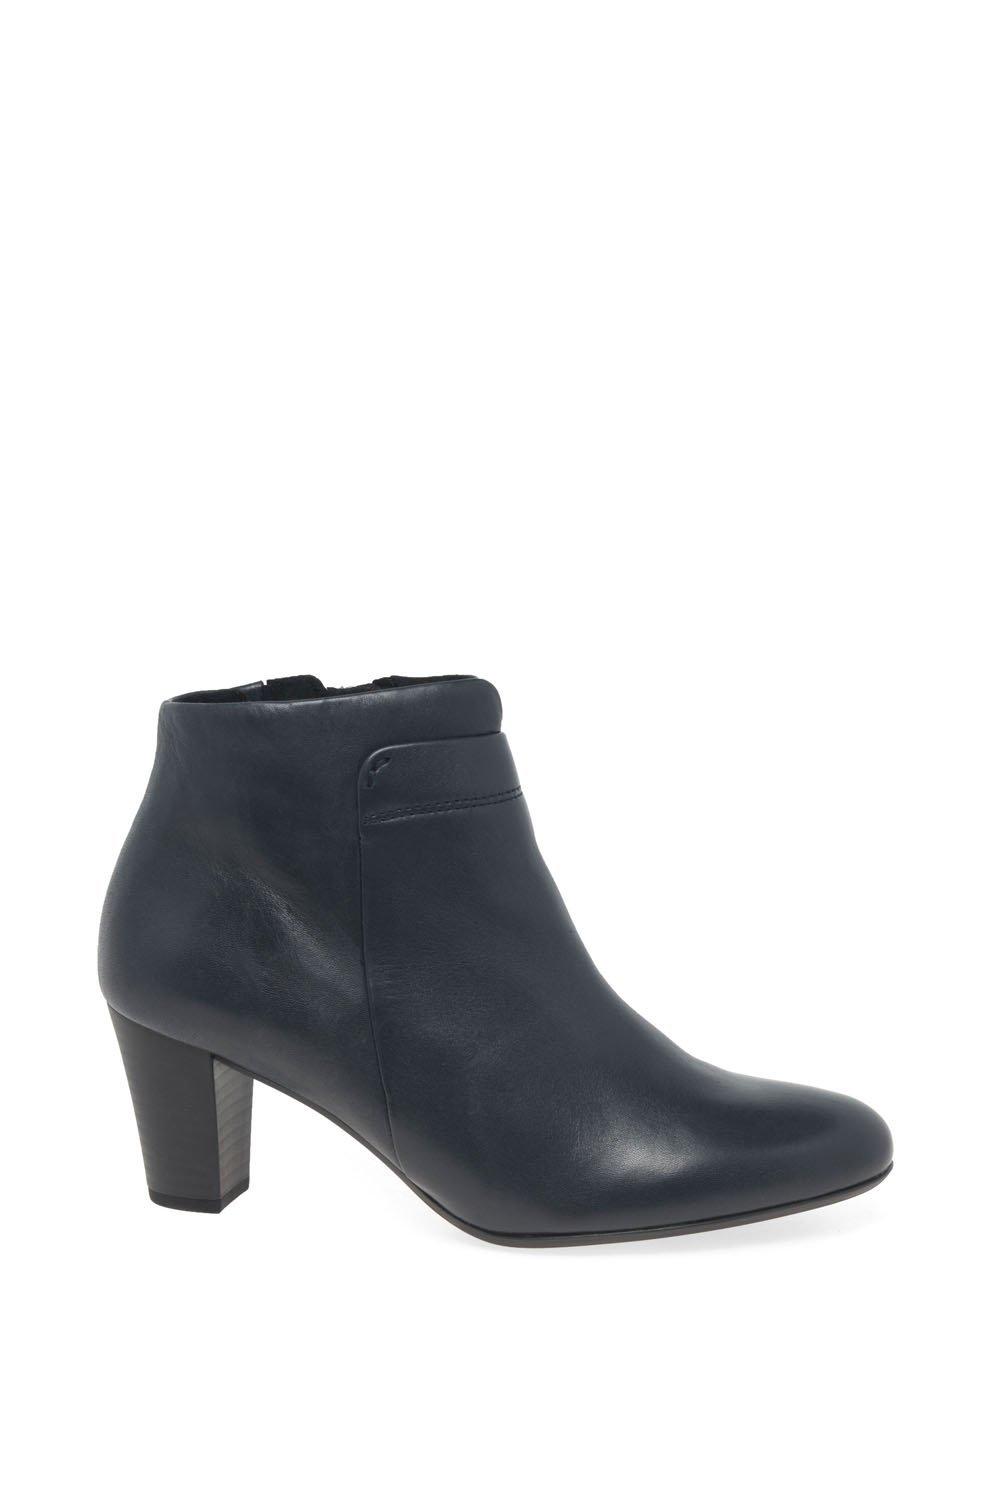 'matlock' ankle boots